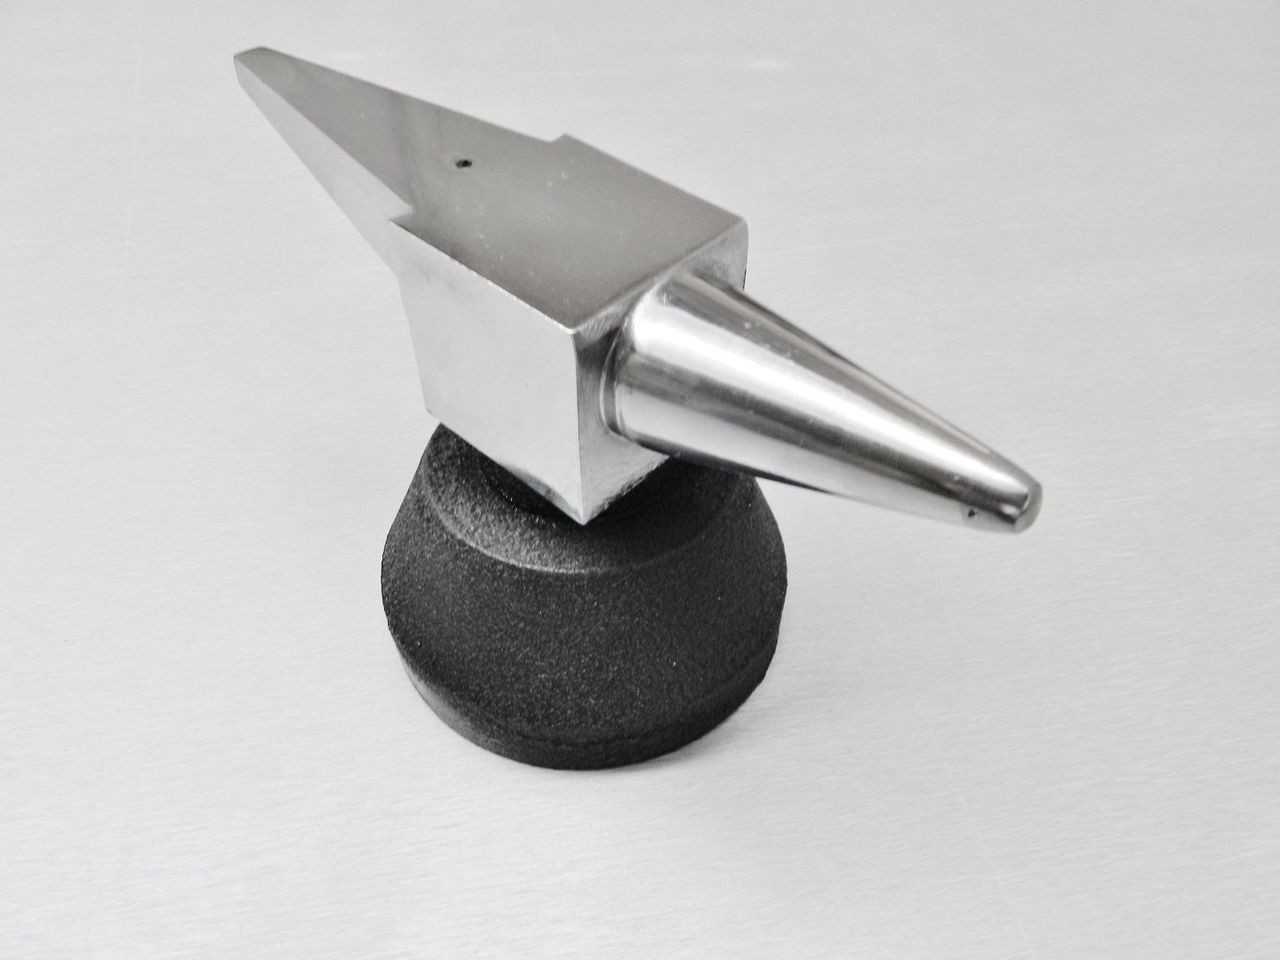 Small Horn Anvil with Base